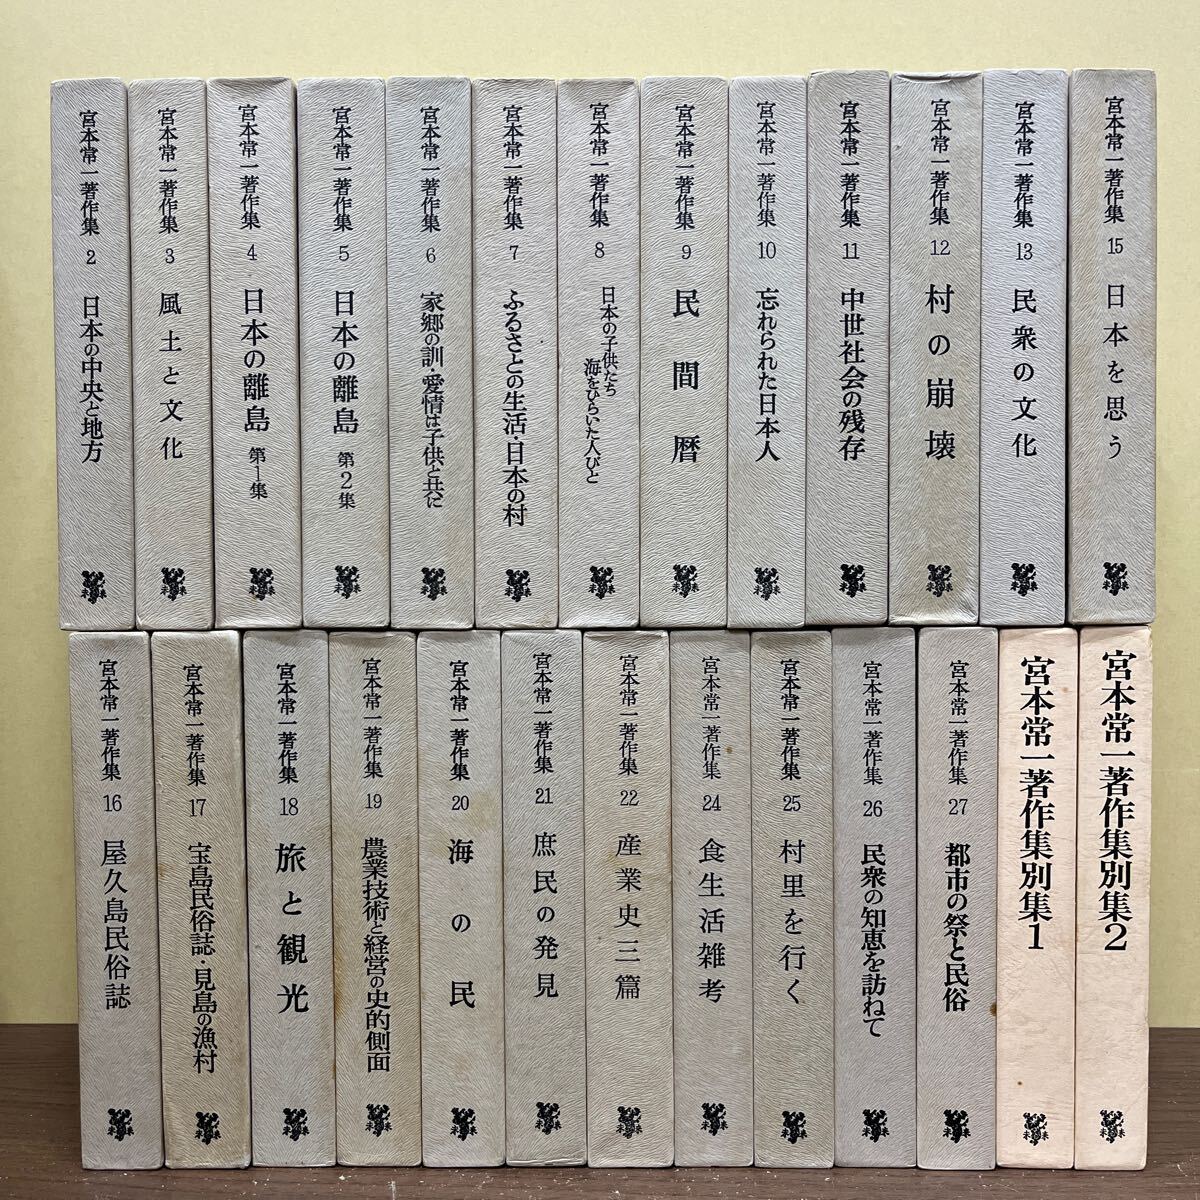 .book@. one work work compilation 26 pcs. set sale race . agriculture sociology manner earth chronicle . earth history future company / secondhand book / not yet cleaning not yet inspection goods / title condition is in the image verification ./ no claim .